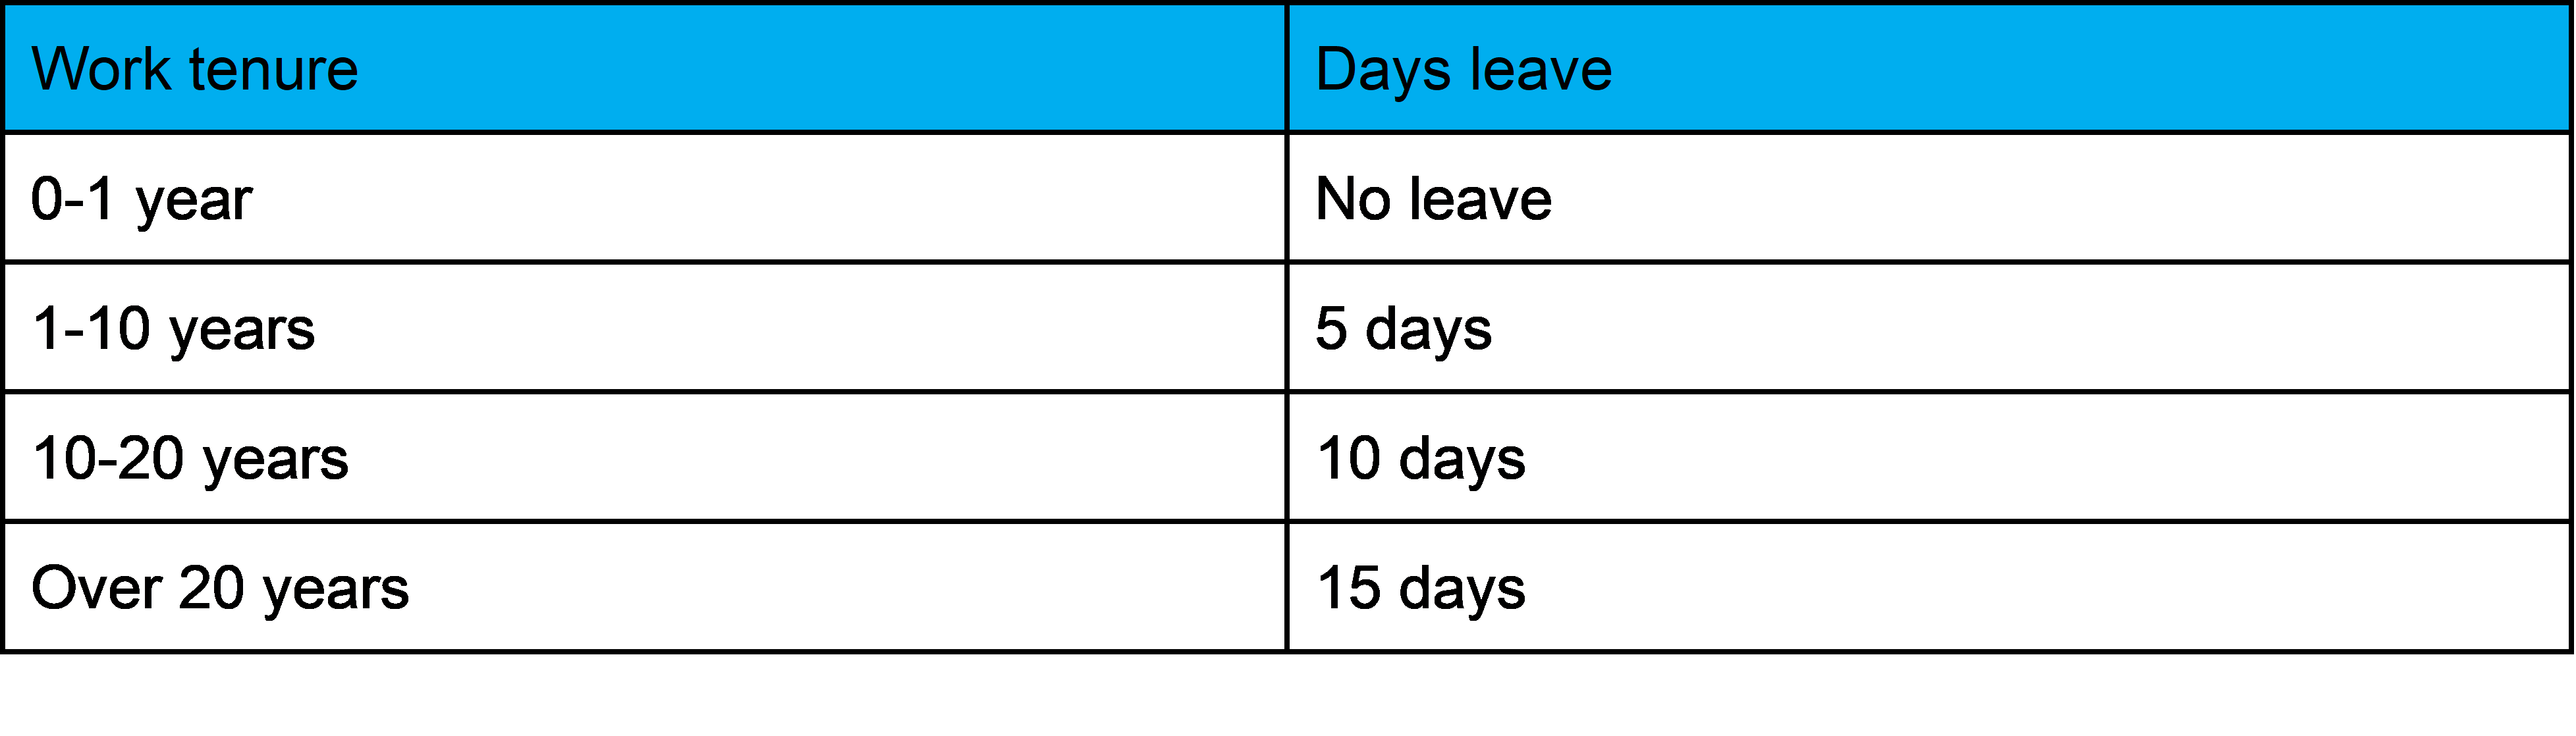 Annual leave in China according to employment duration